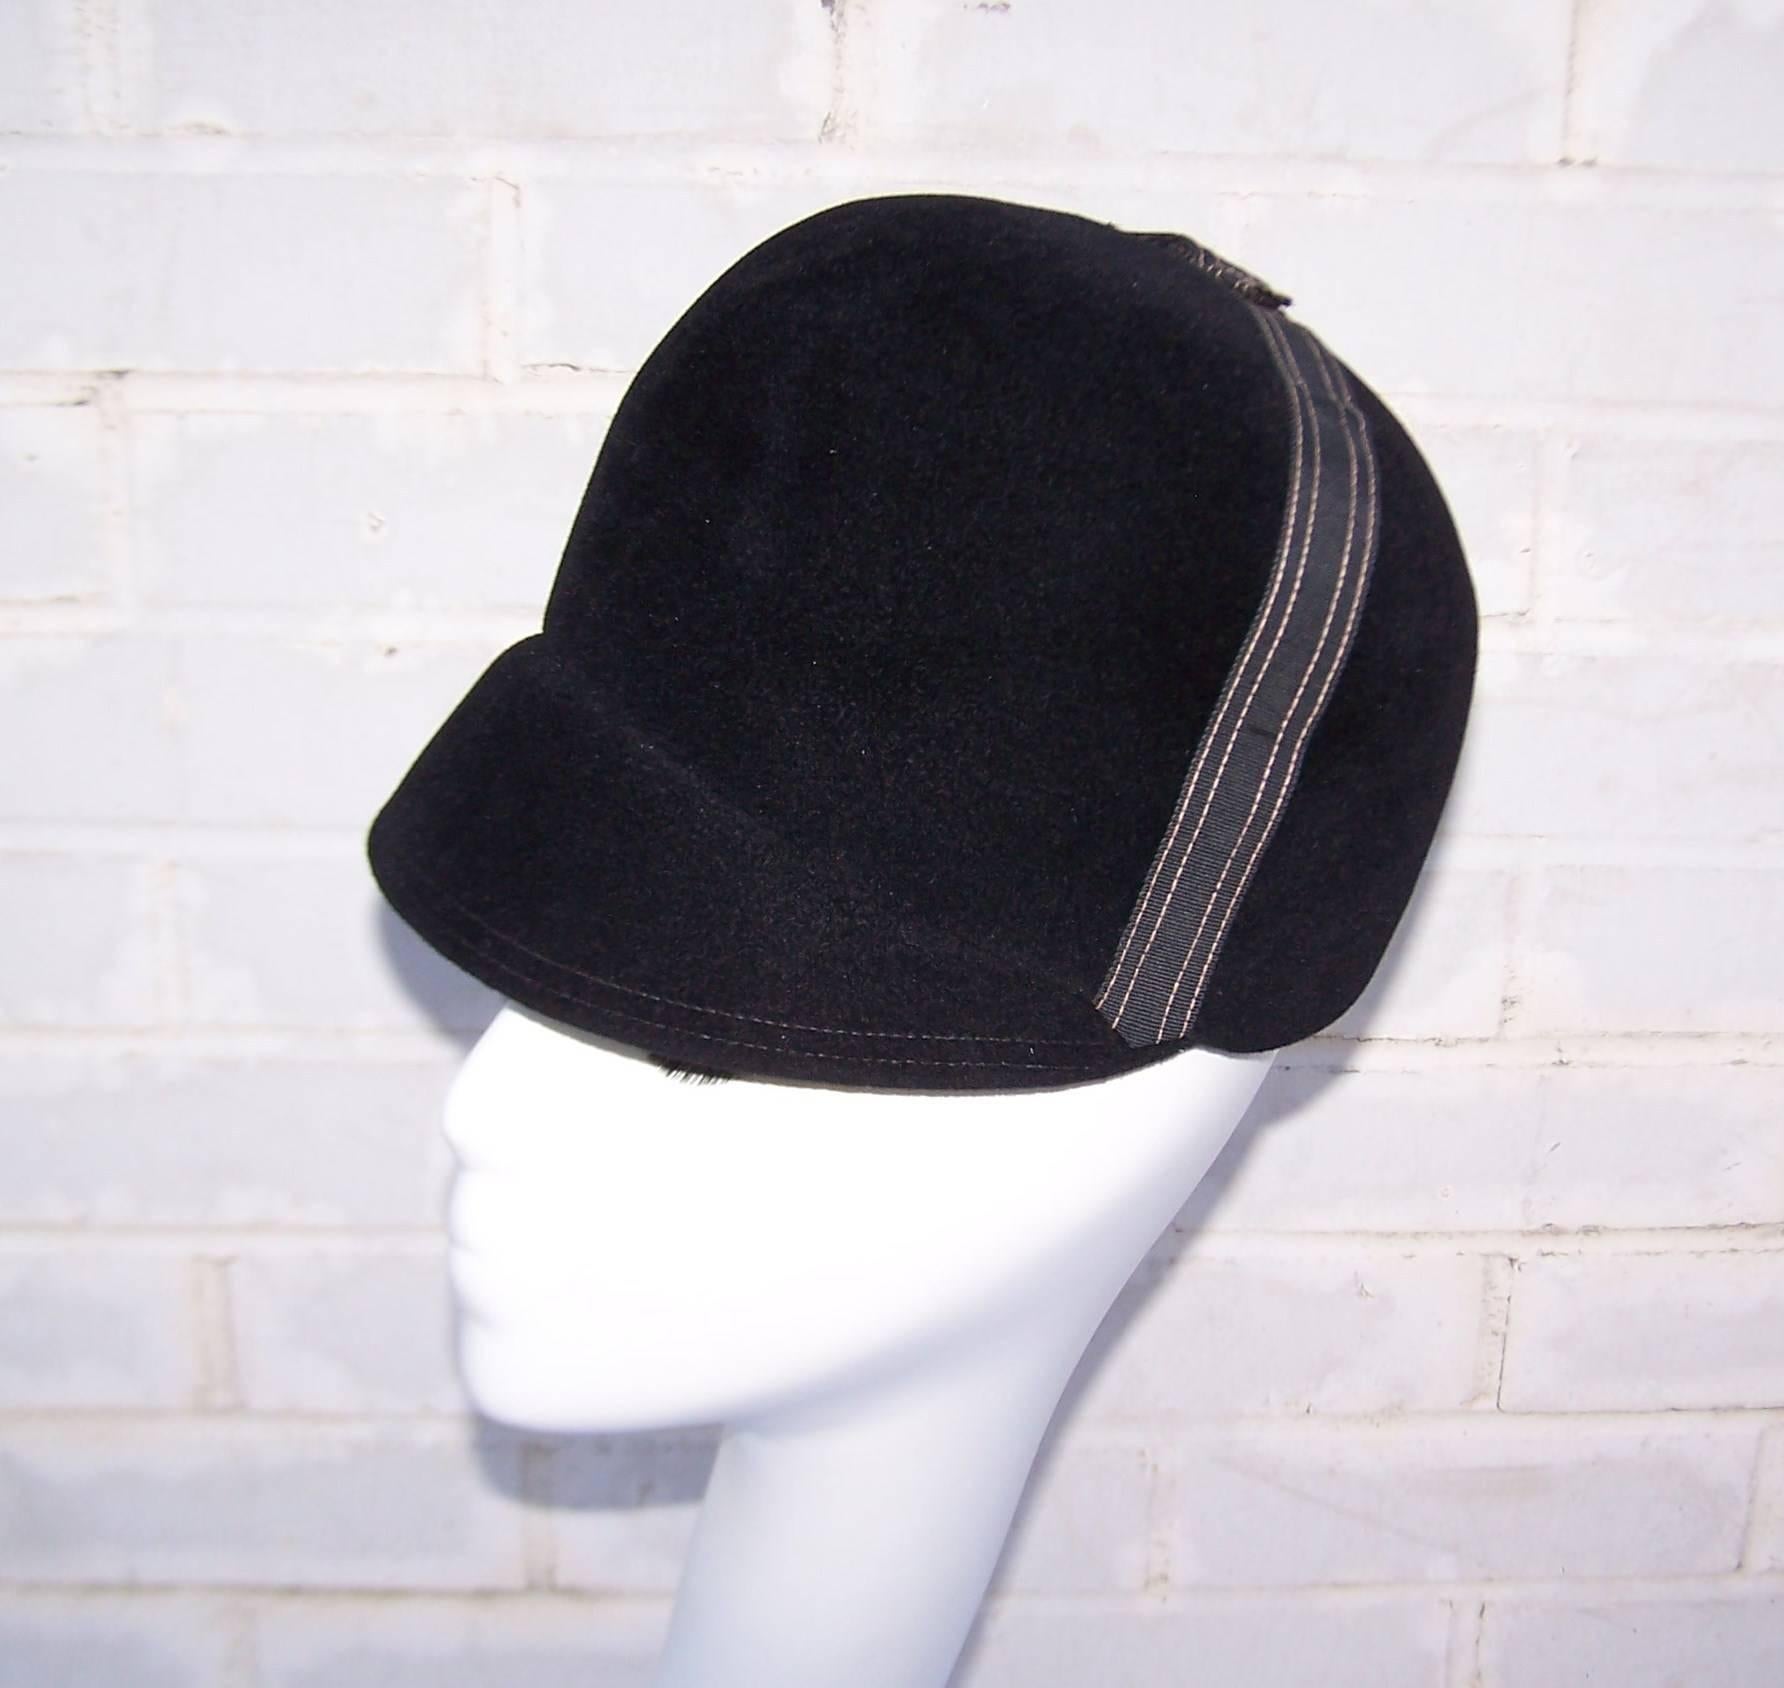 equestrian style hat